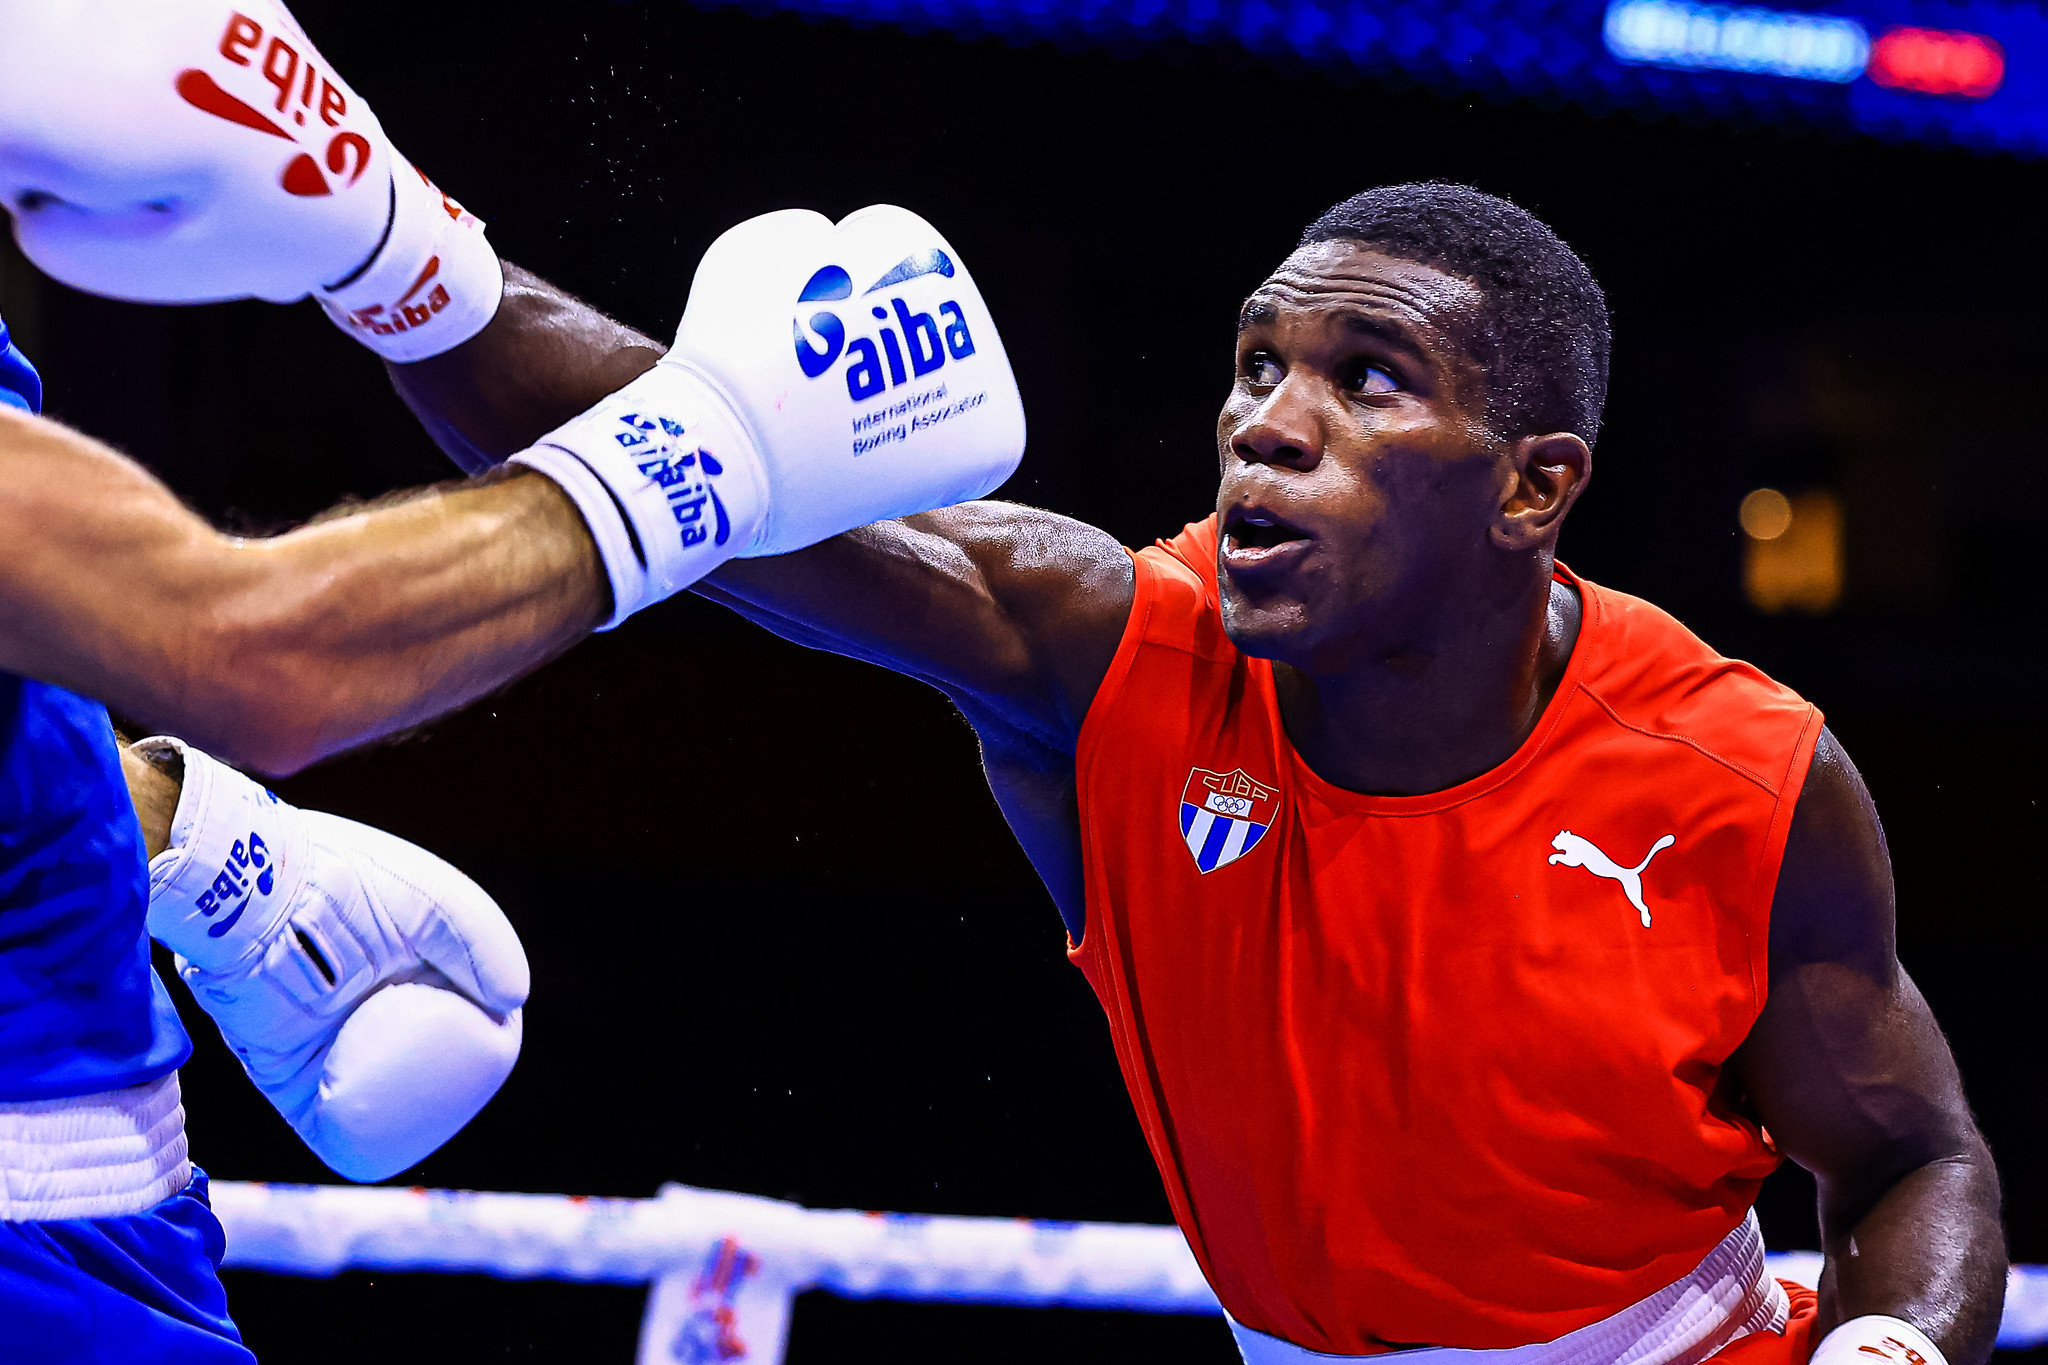 Yoenlis Hernandez made it through to the under-75kg semi-finals for Cuba ©AIBA